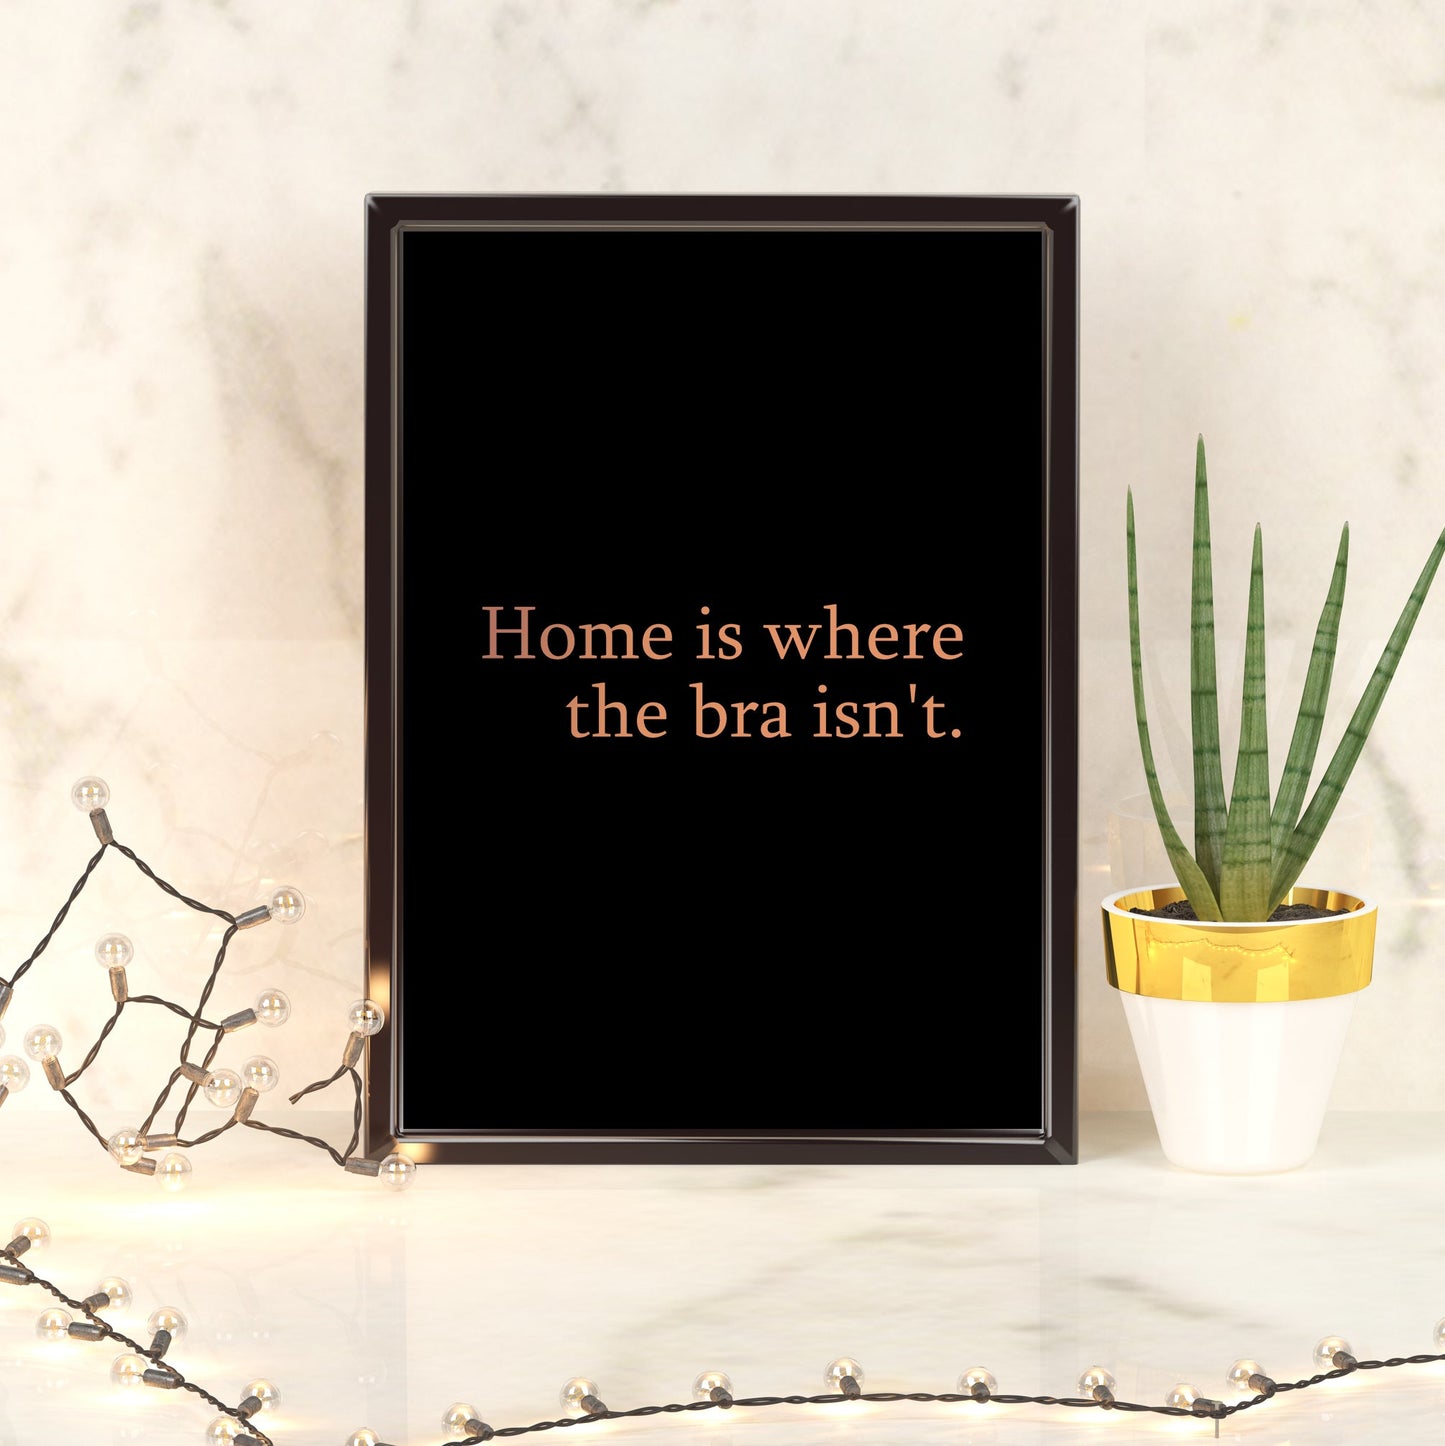 Home is where the bra isn't | A4 Foil Print Quote-Foil Print-Adnil Creations